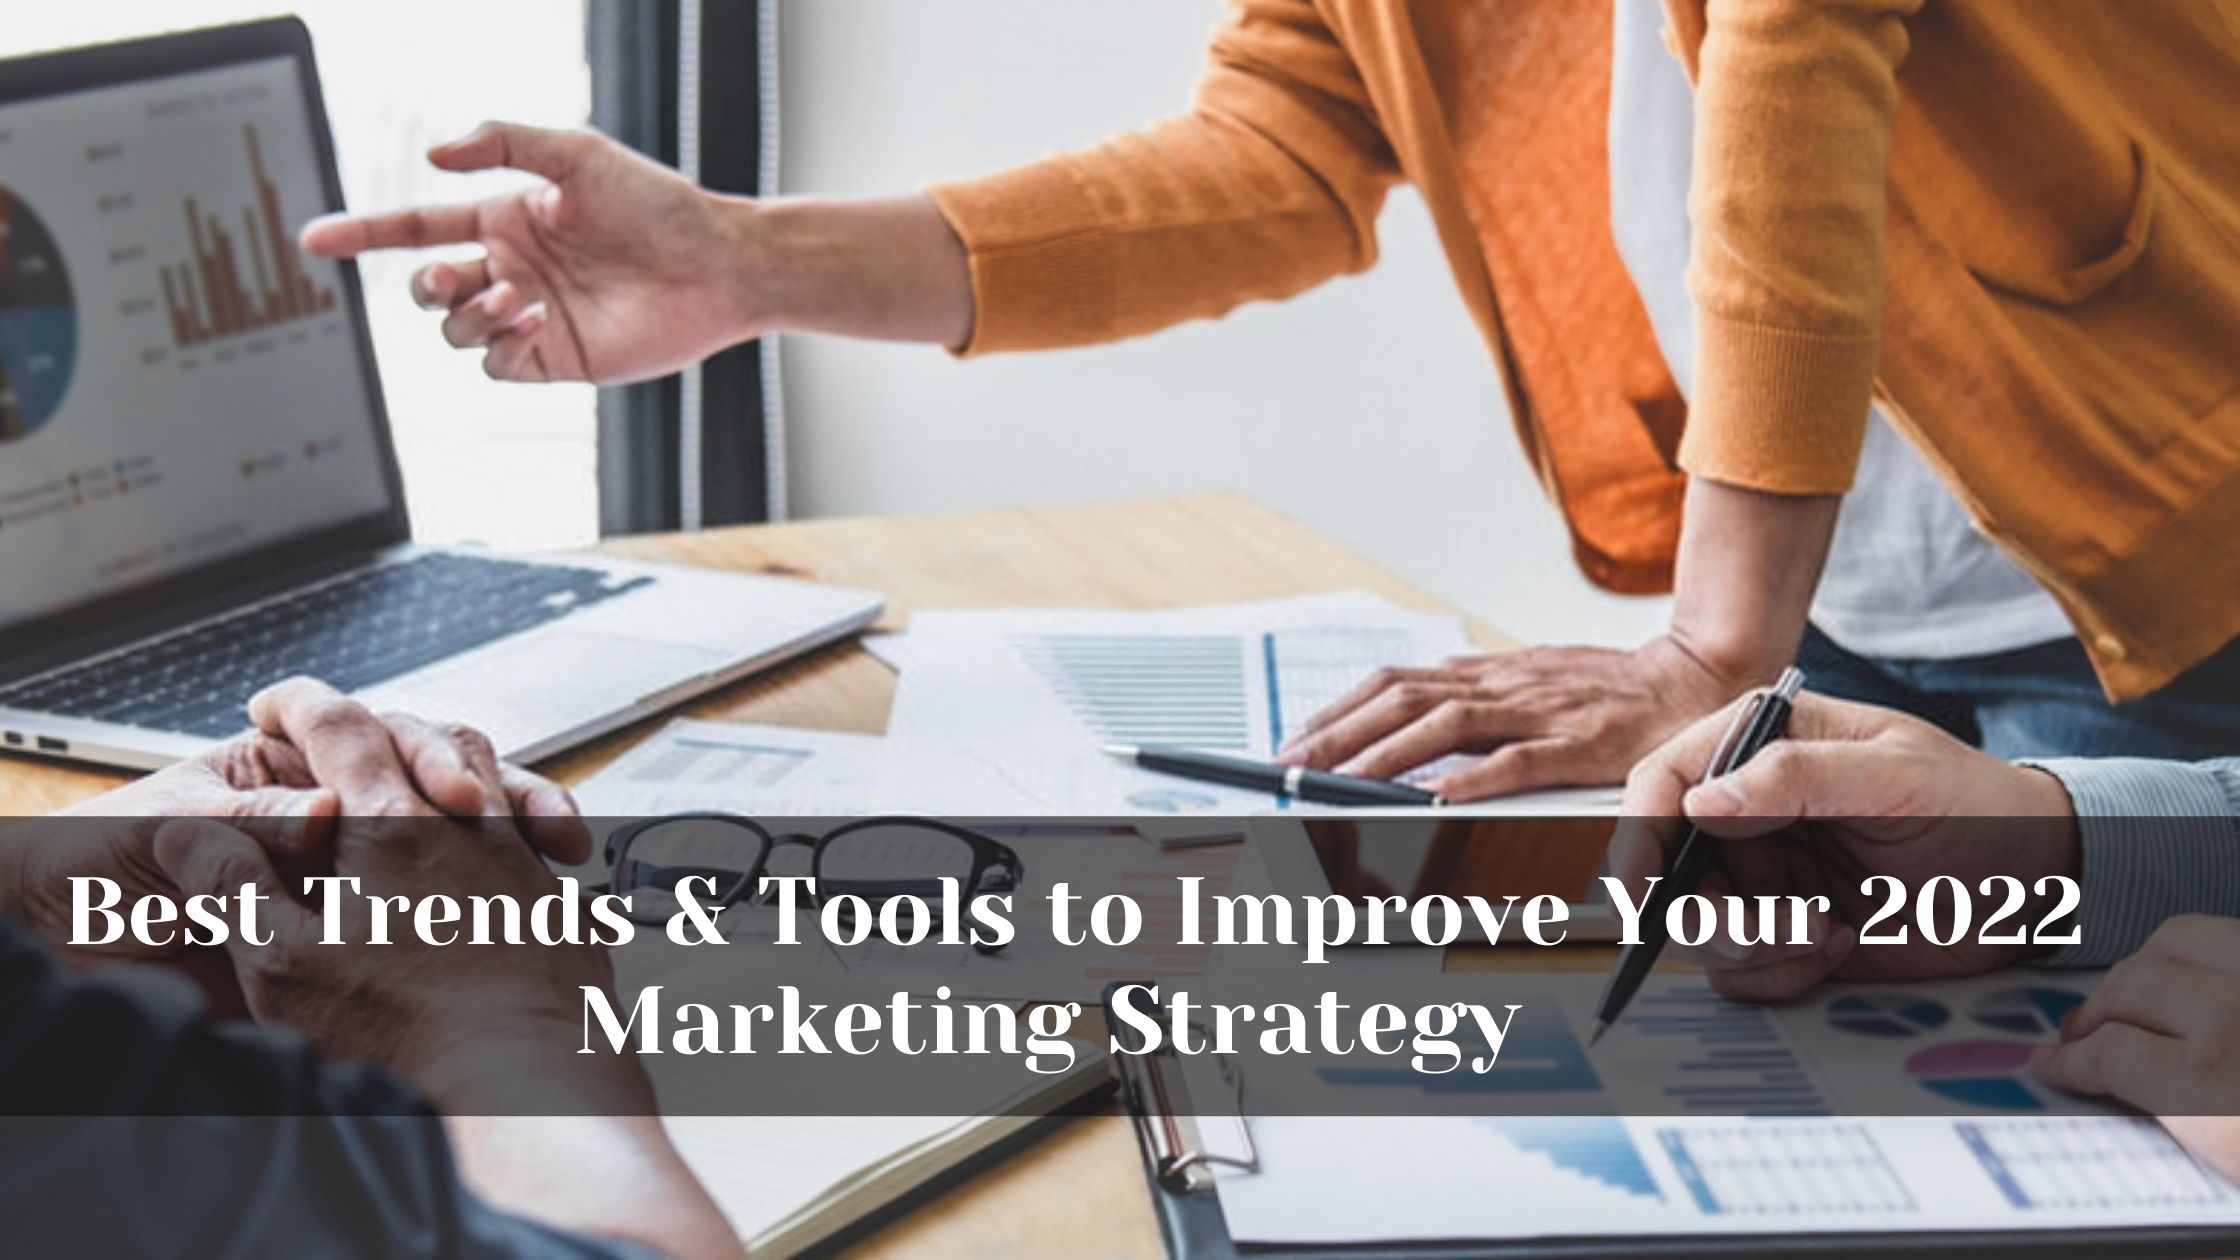 Best Trends & Tools to Improve Your 2022 Marketing Strategy